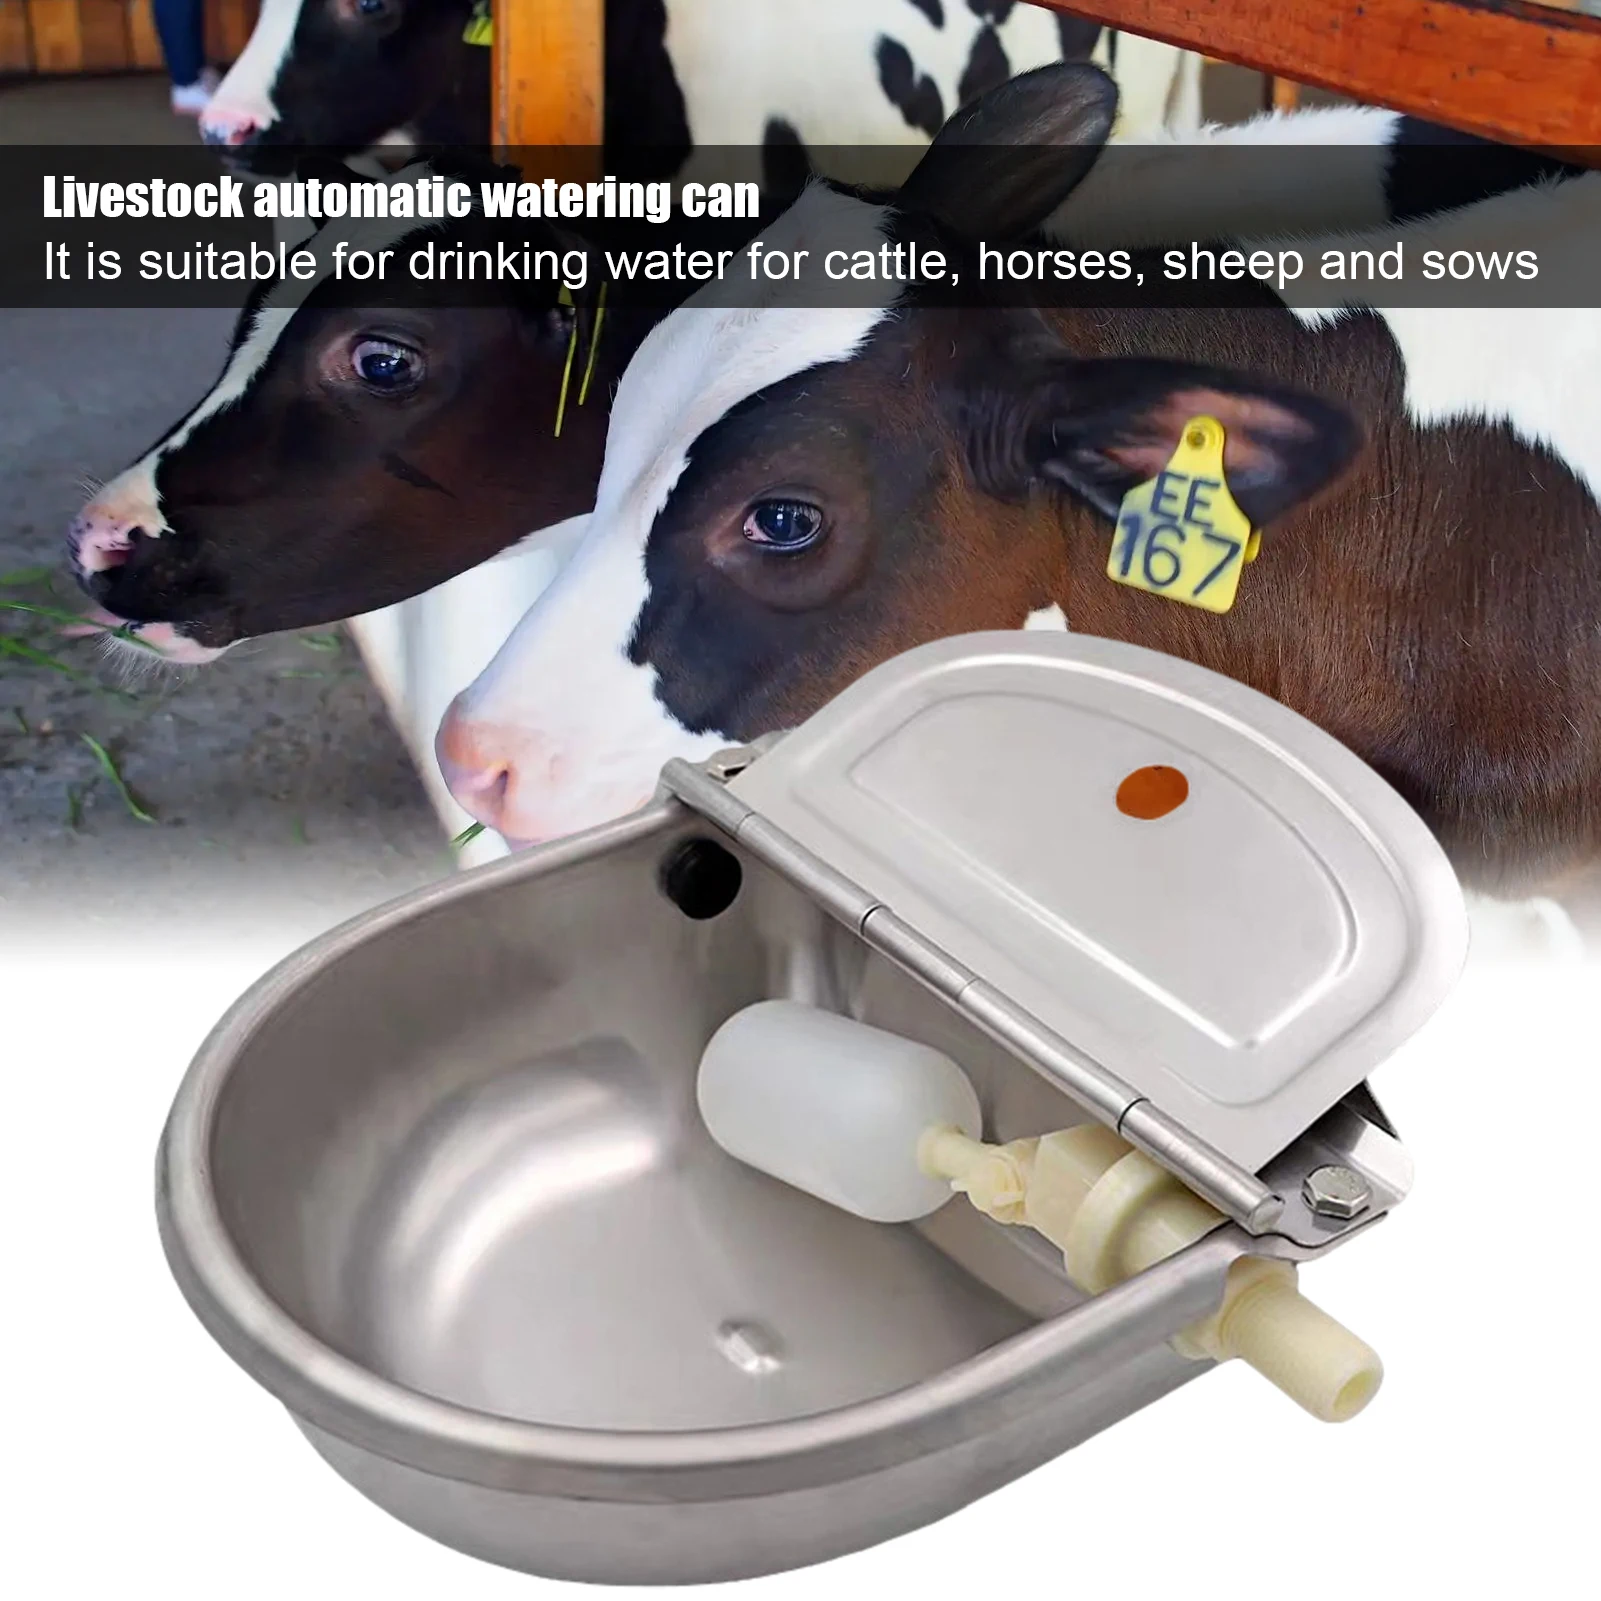 Automatic Stainless Steel Cow Waterer Bowl Horse Cattle Drinking Bowl Draining Hole Float Valve Water Trough Farm Supplies